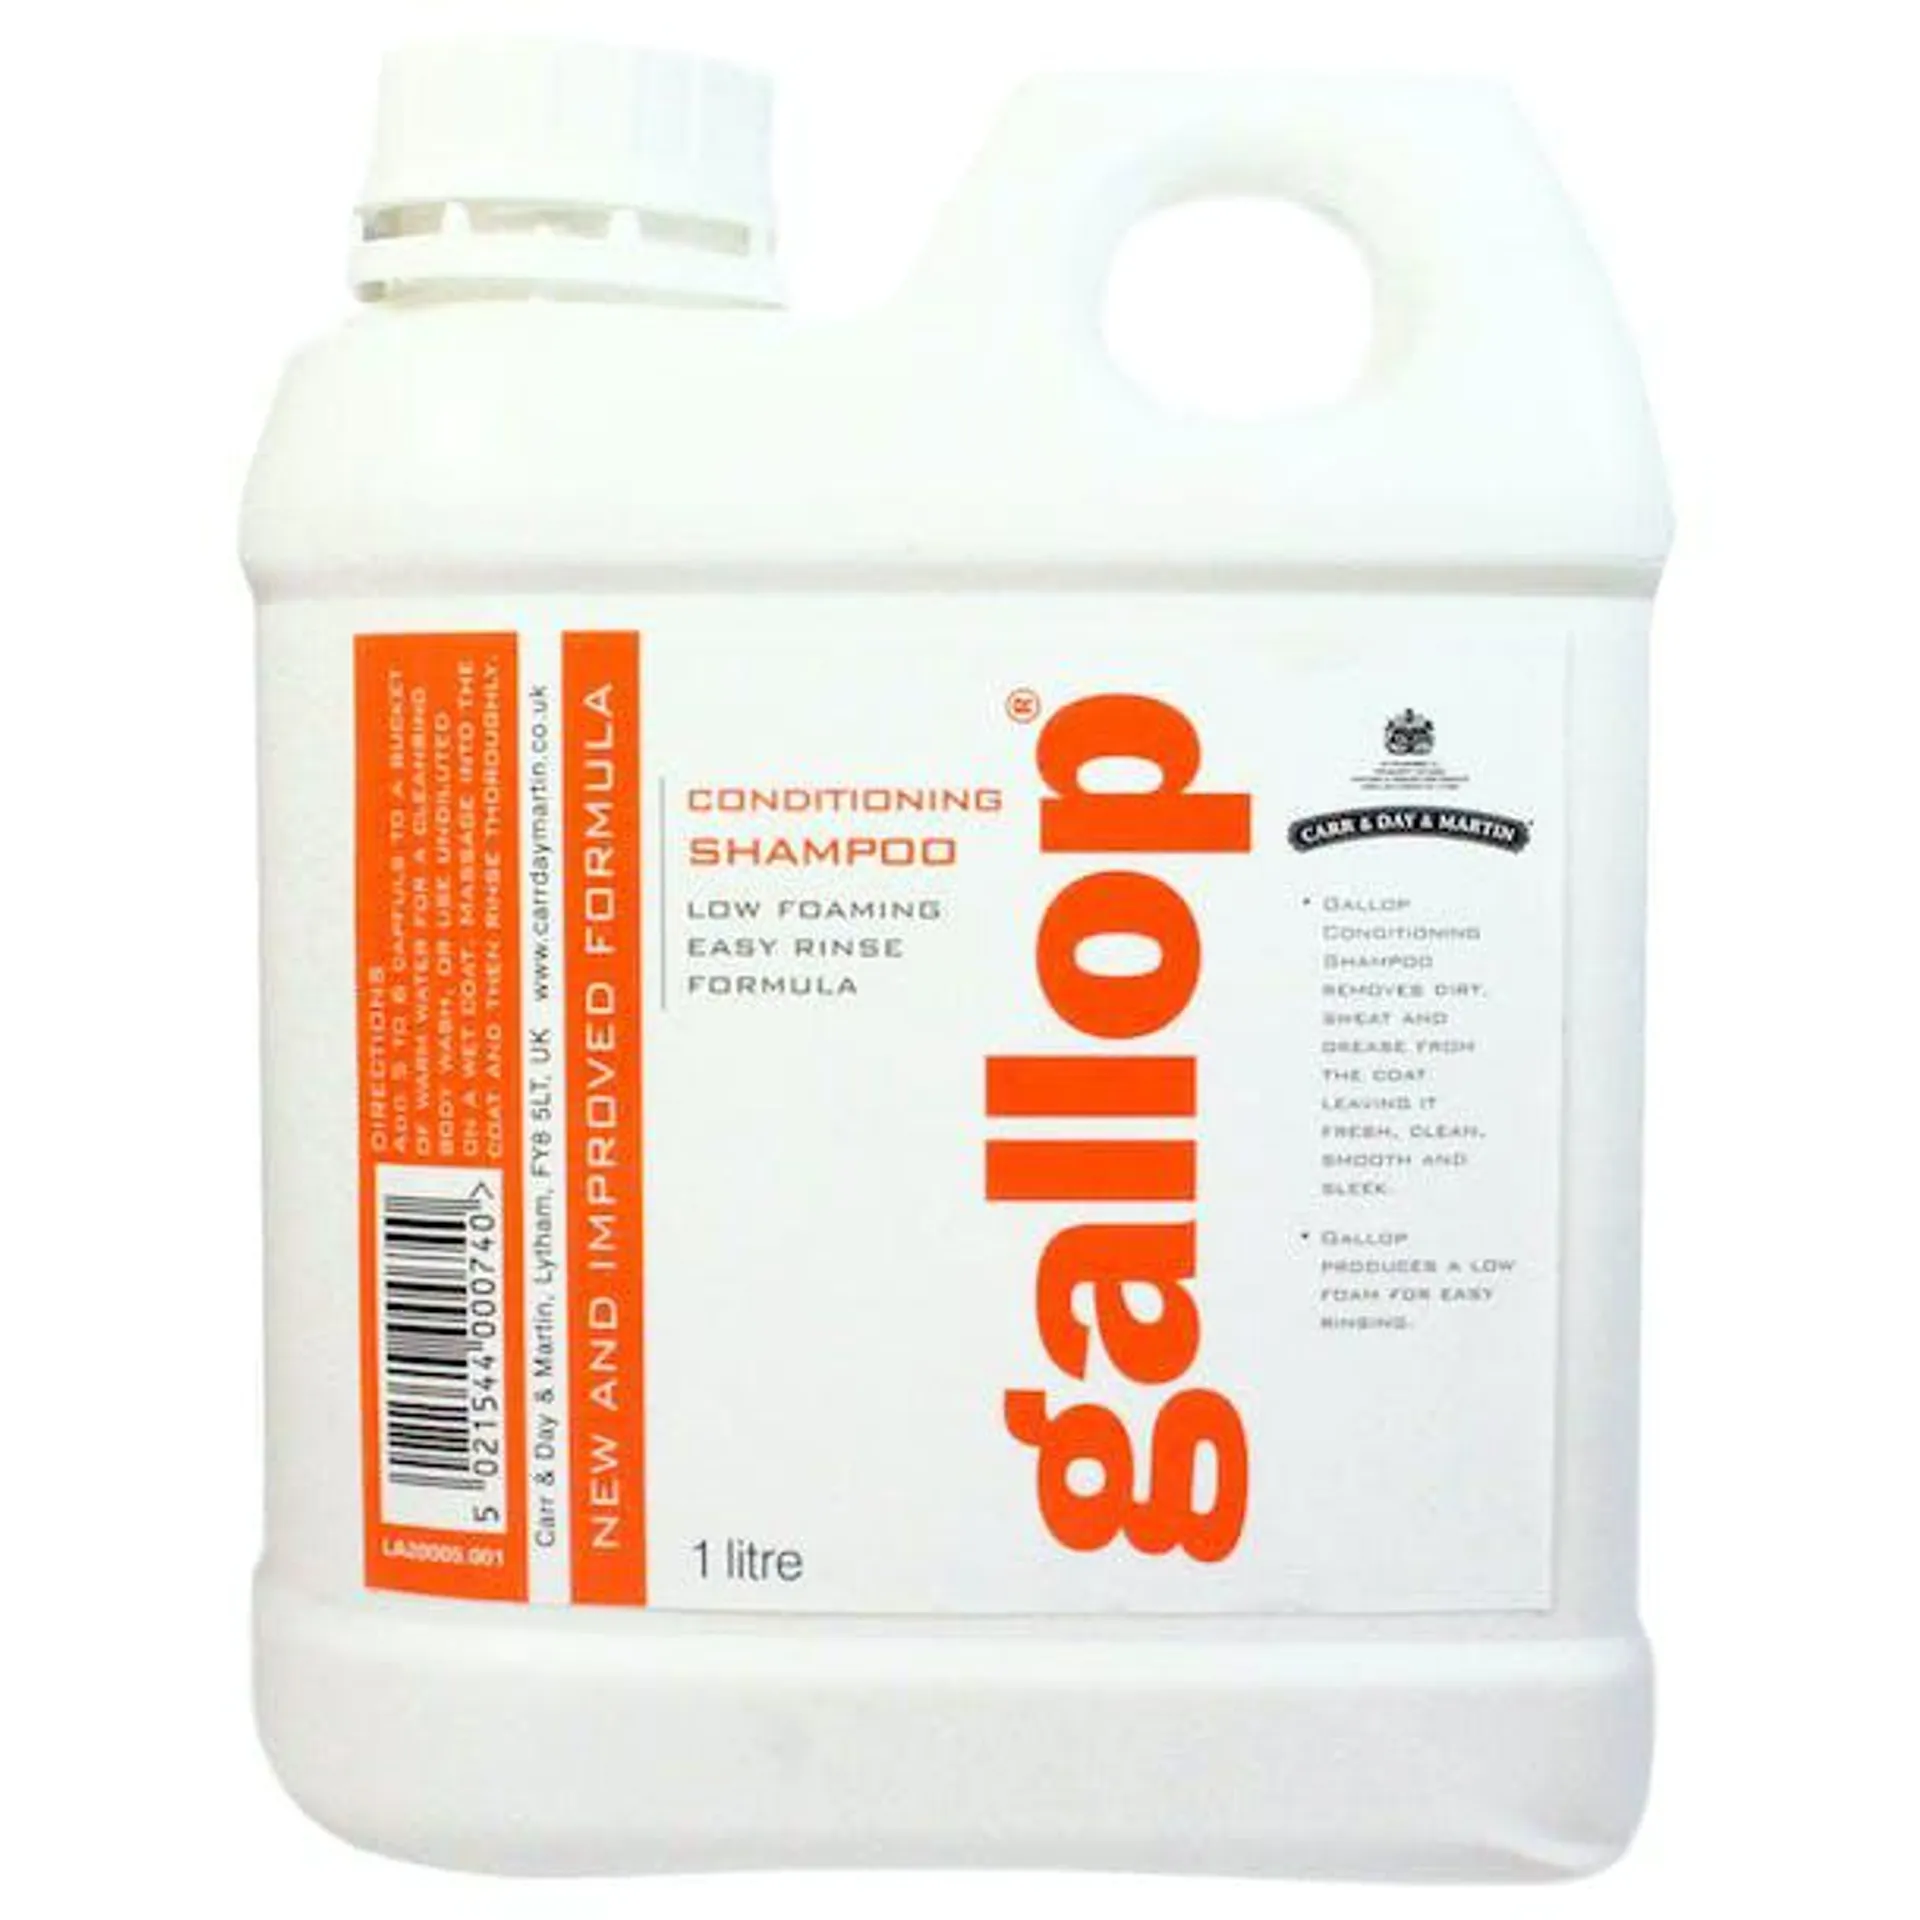 Carr Day and Martin Gallop Conditioning 1 Litre Horse Shampoo